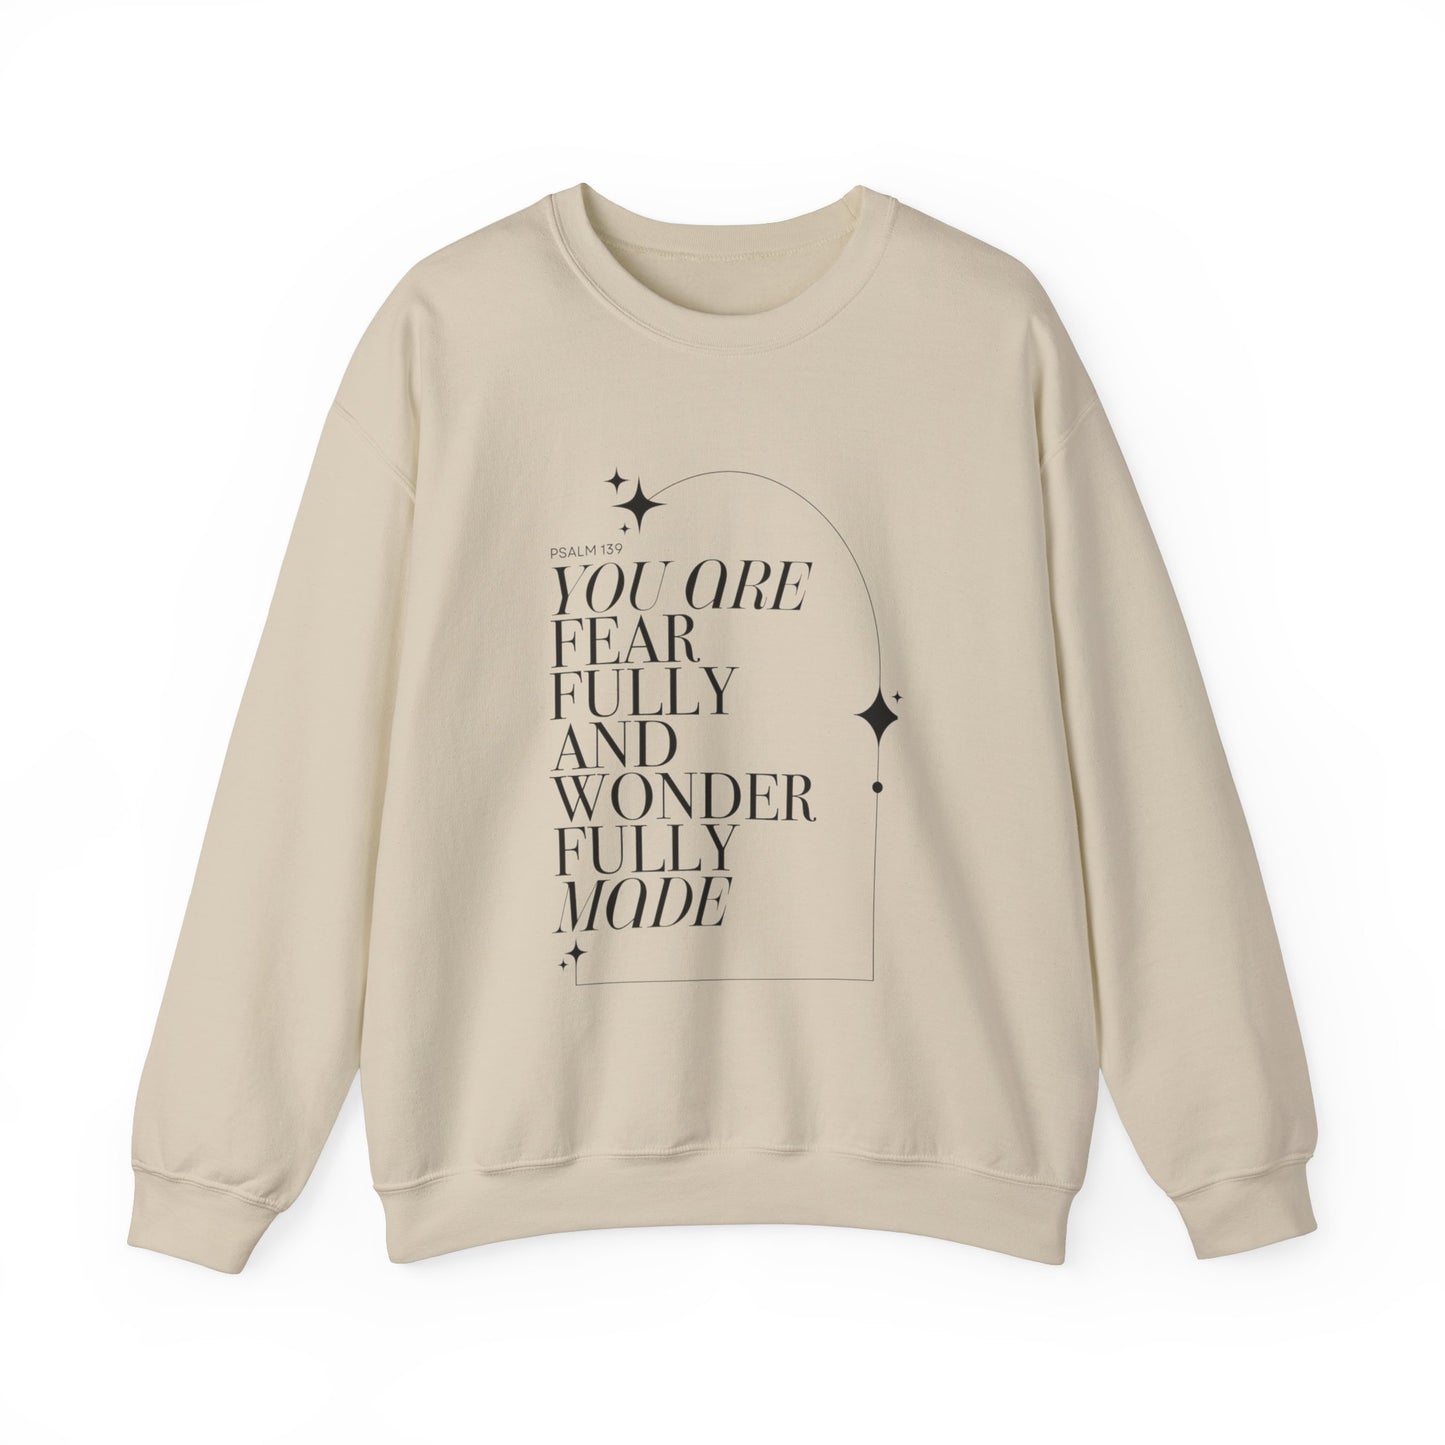 Fear Fully and Wonder fully made Scripture Crewneck For Women, Perfect For Religious Students, Teachers, Perfect Gift For Christian Faith, Catholic School Gift & Faithful Individuals